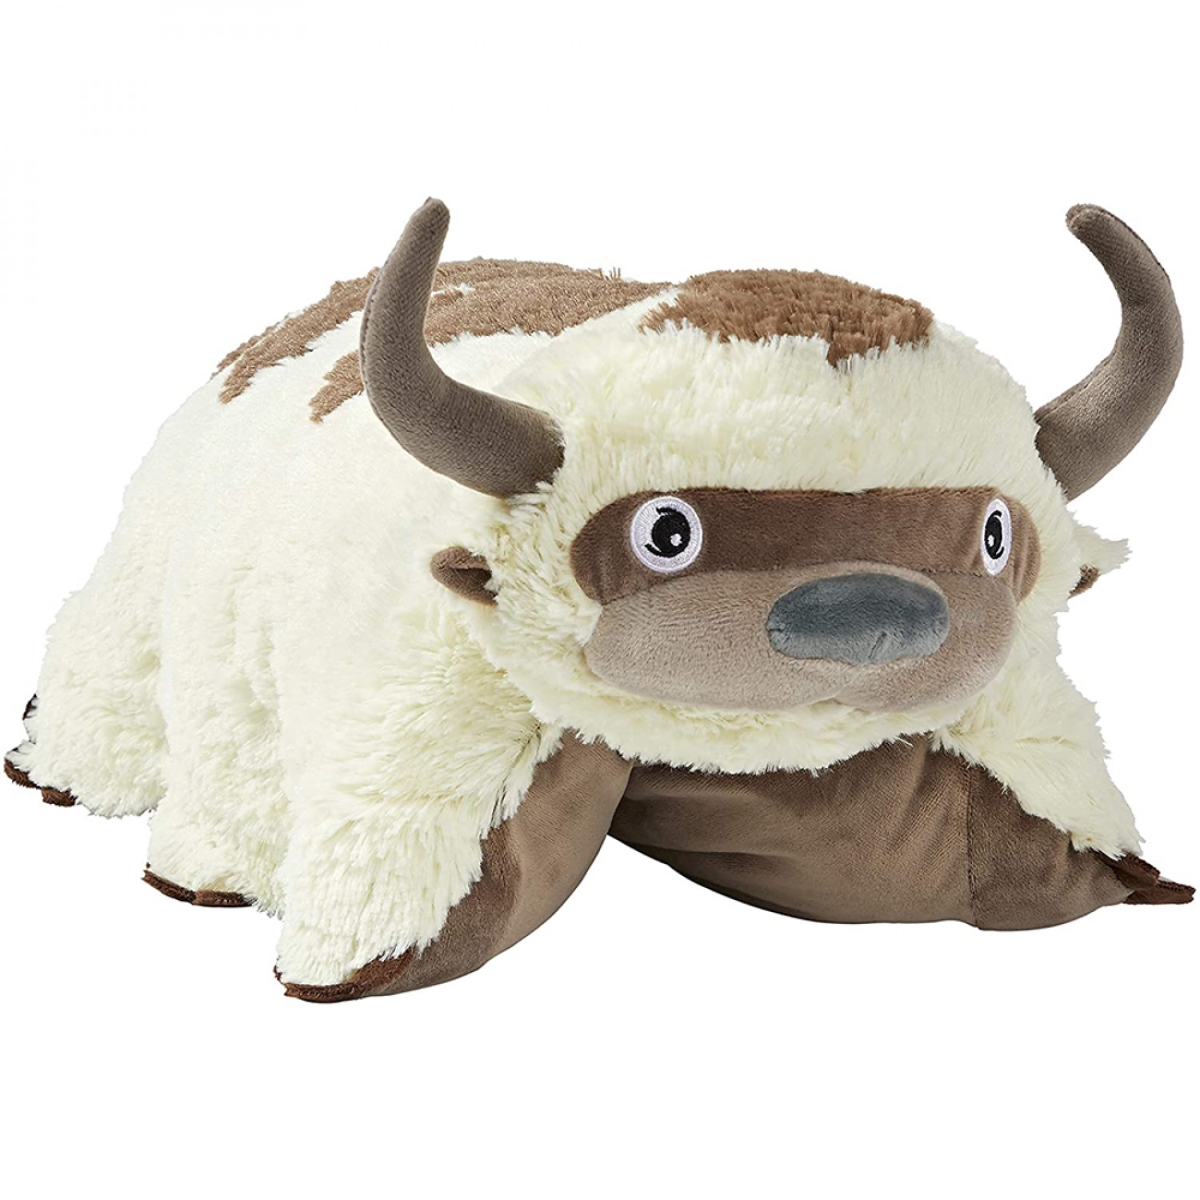 Picture of Avatar the Last Airbender 834267 Appa Pillow Pet - Avatar the Last Airbender Stuffed Animal Plush Toy